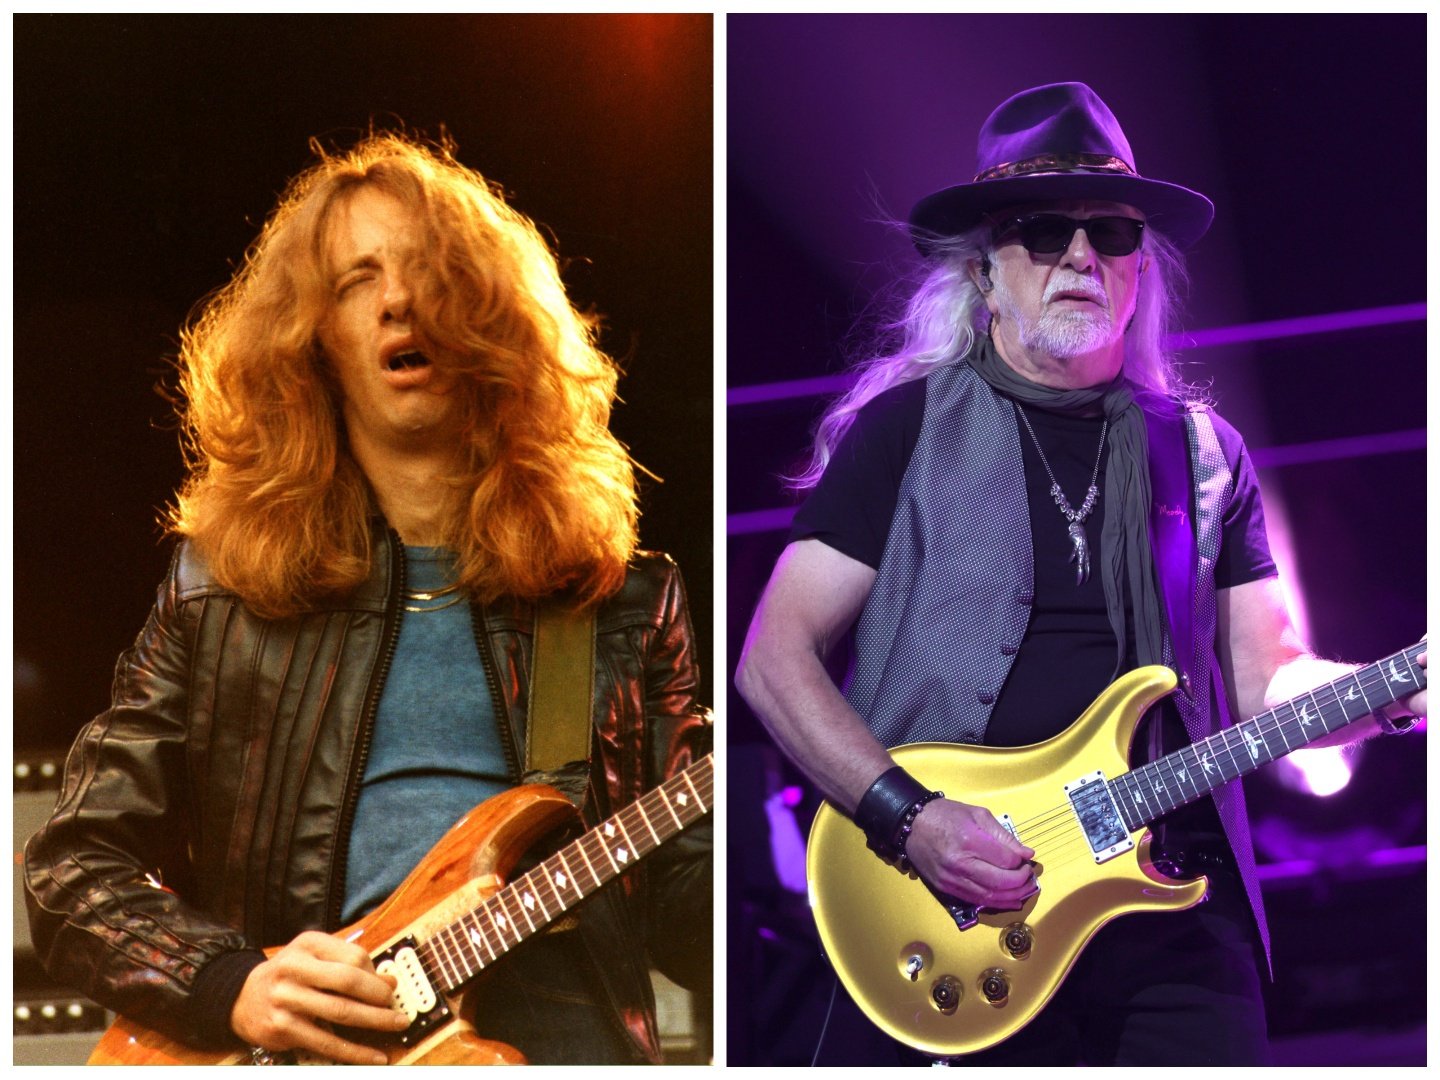 Brad Whitford wears a leather jacket and plays guitar in 1977. Brad Whitford wears a hat and sunglasses and plays guitar in 2023.